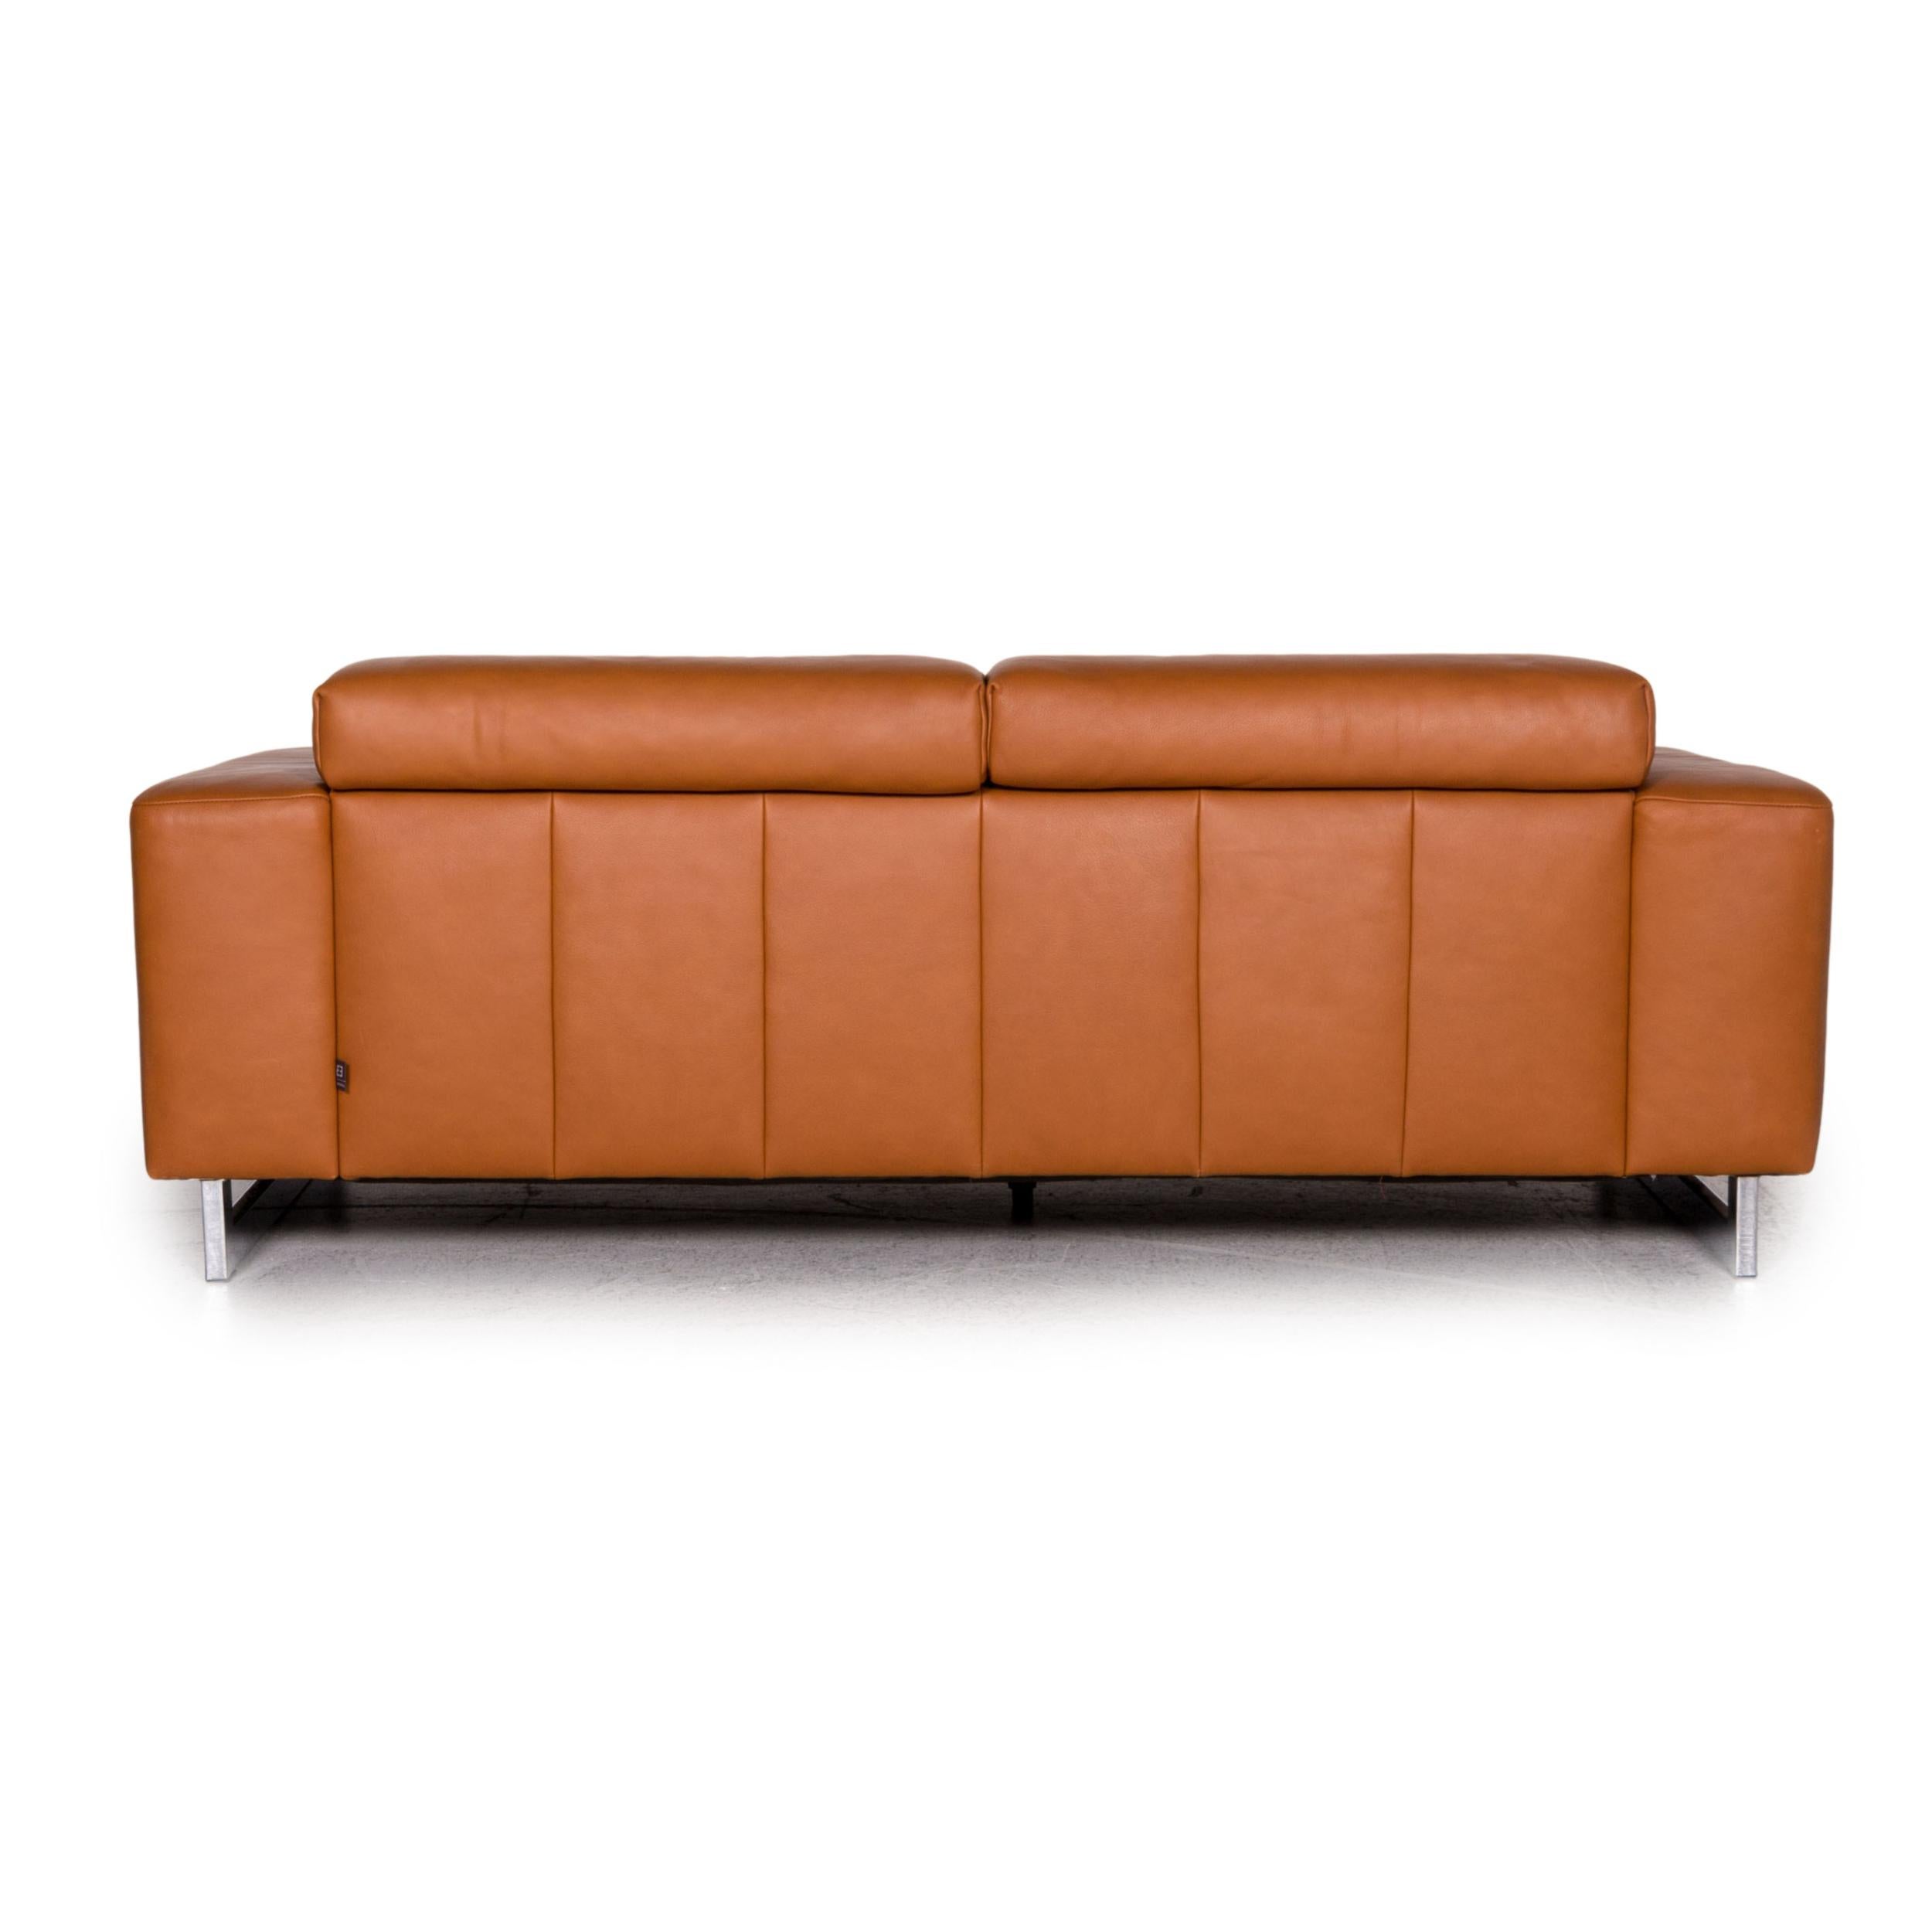 Ewald Schillig Leather Sofa Brown Cognac Three-Seater Couch For Sale 2